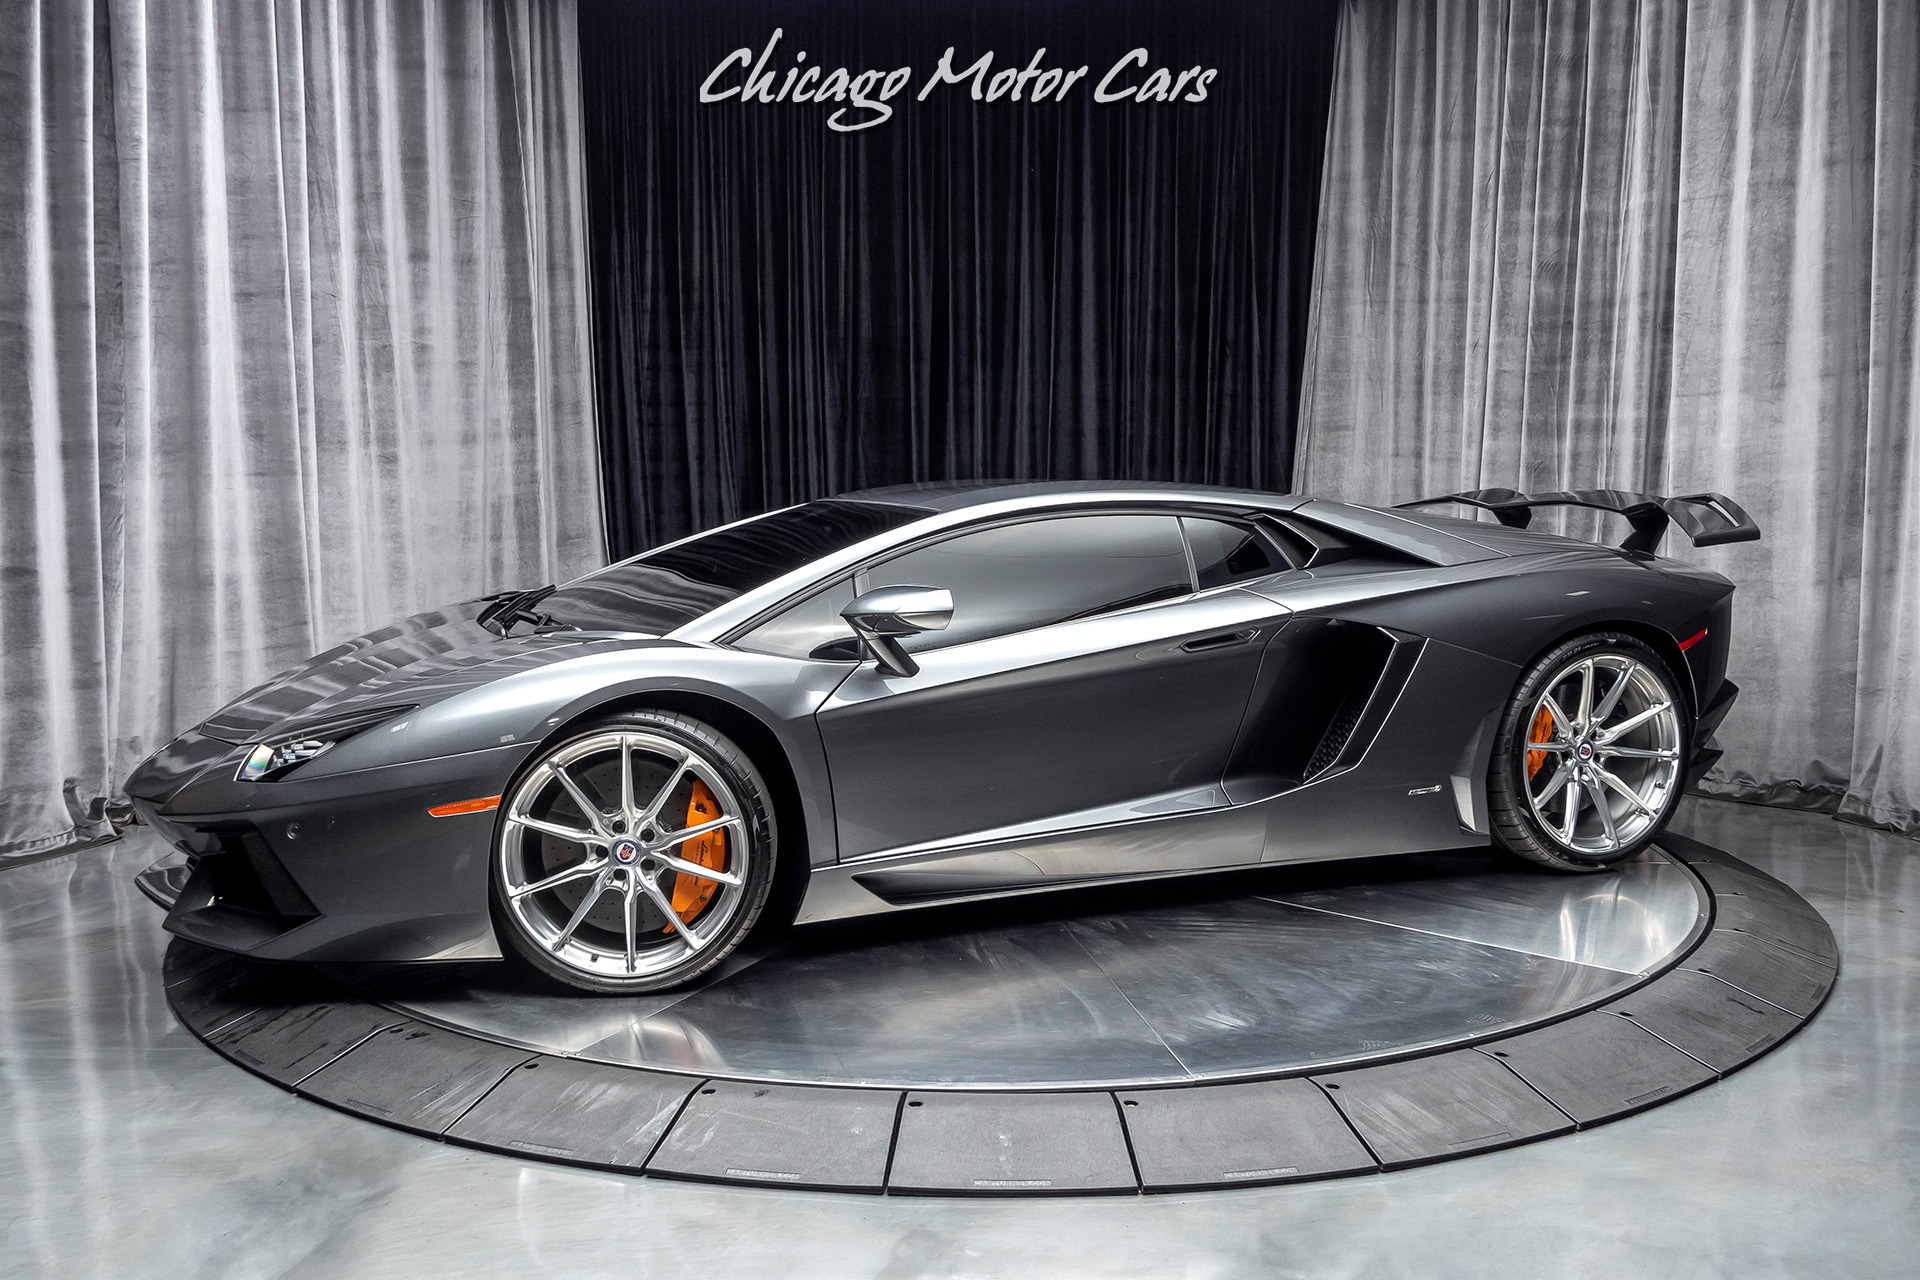 Used 2013 Lamborghini Aventador LP700-4 Coupe MSRP $434,915+$50k in  Upgrades Carbon Fiber! Serviced! For Sale (Special Pricing) | Chicago Motor  Cars Stock #17363